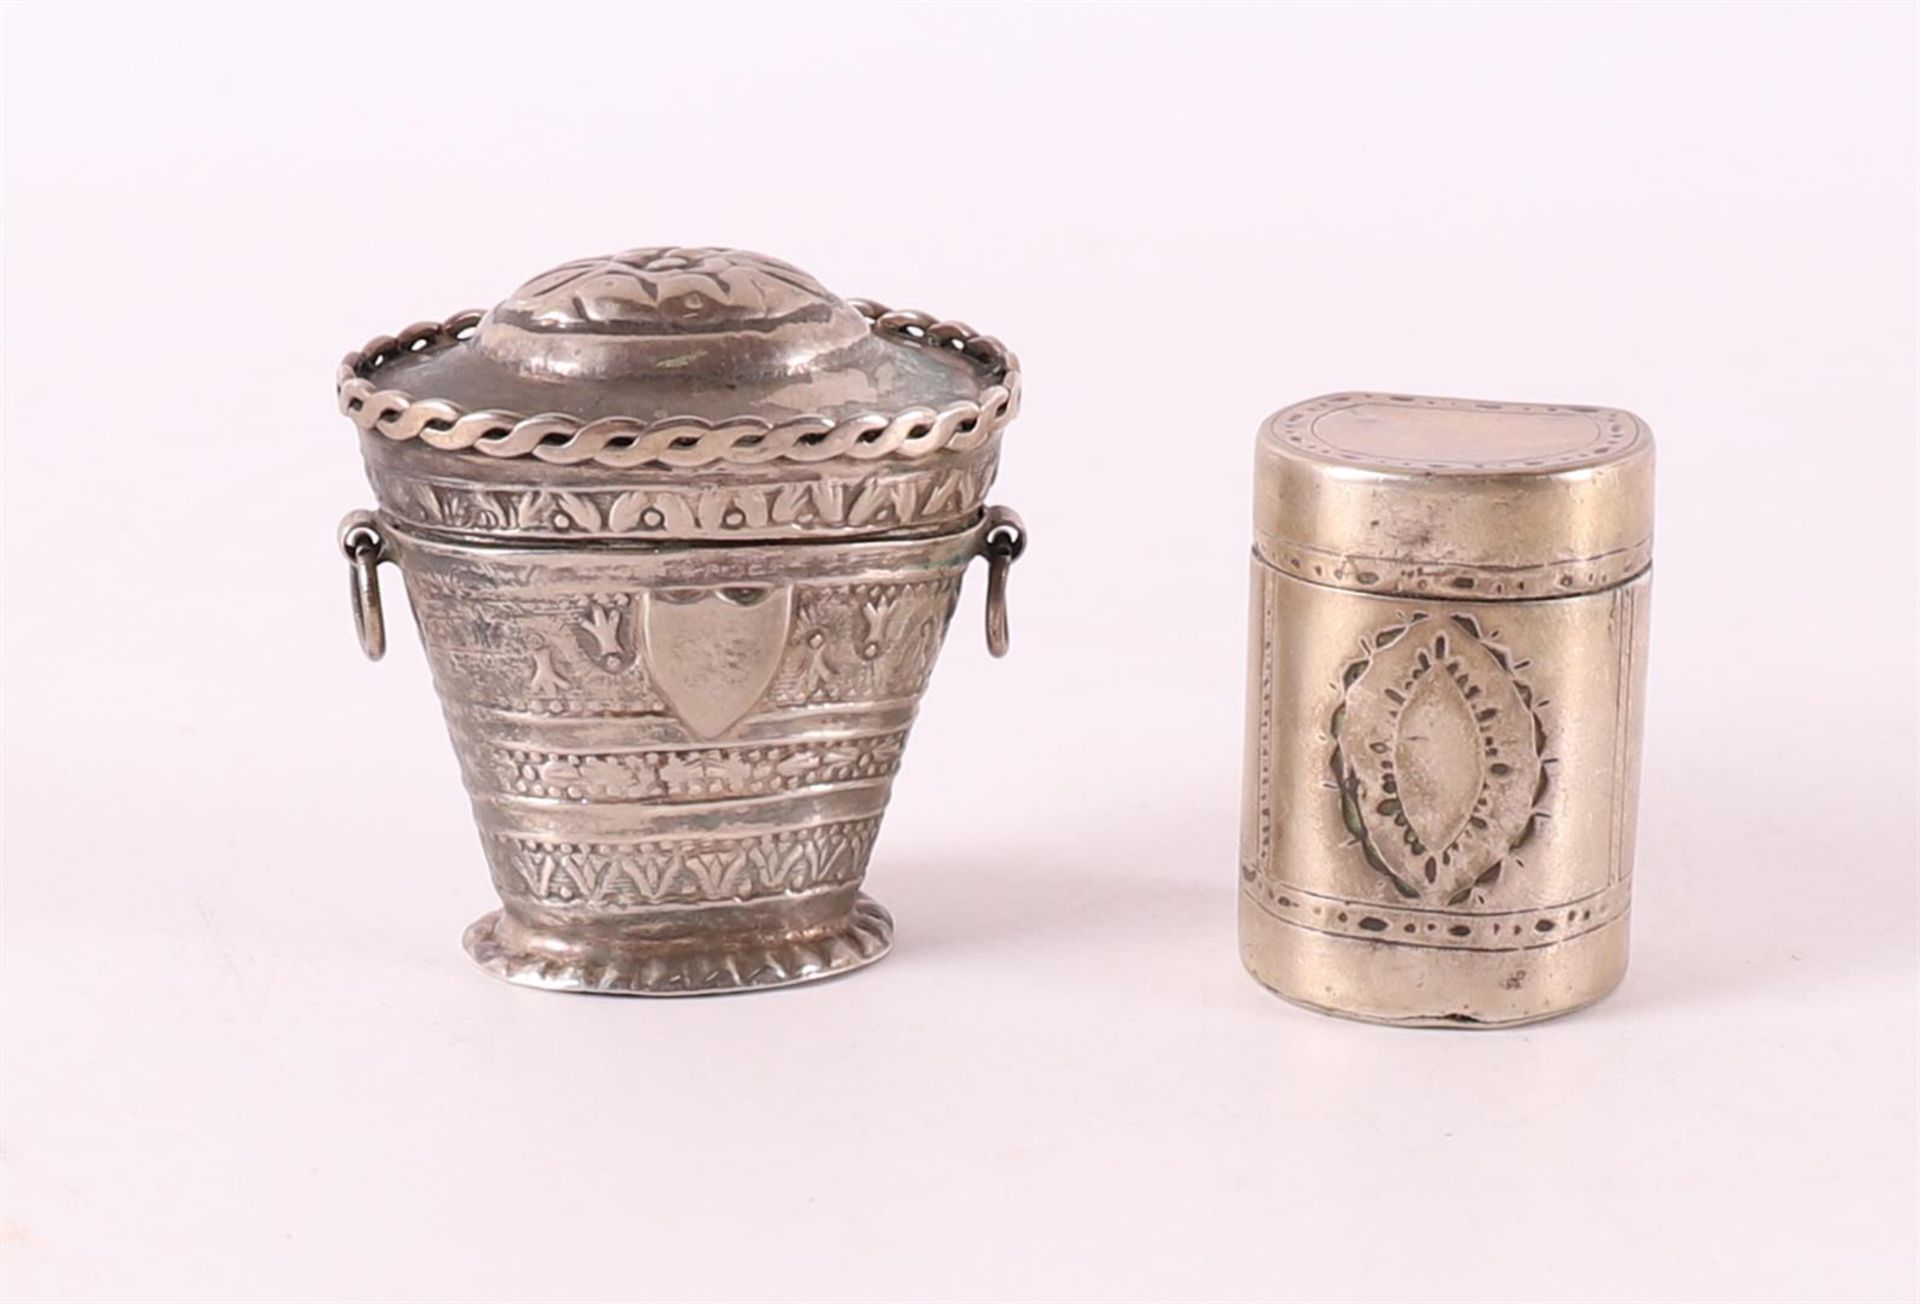 A 2nd grade silver basket-shaped capelin box, early 19th century.